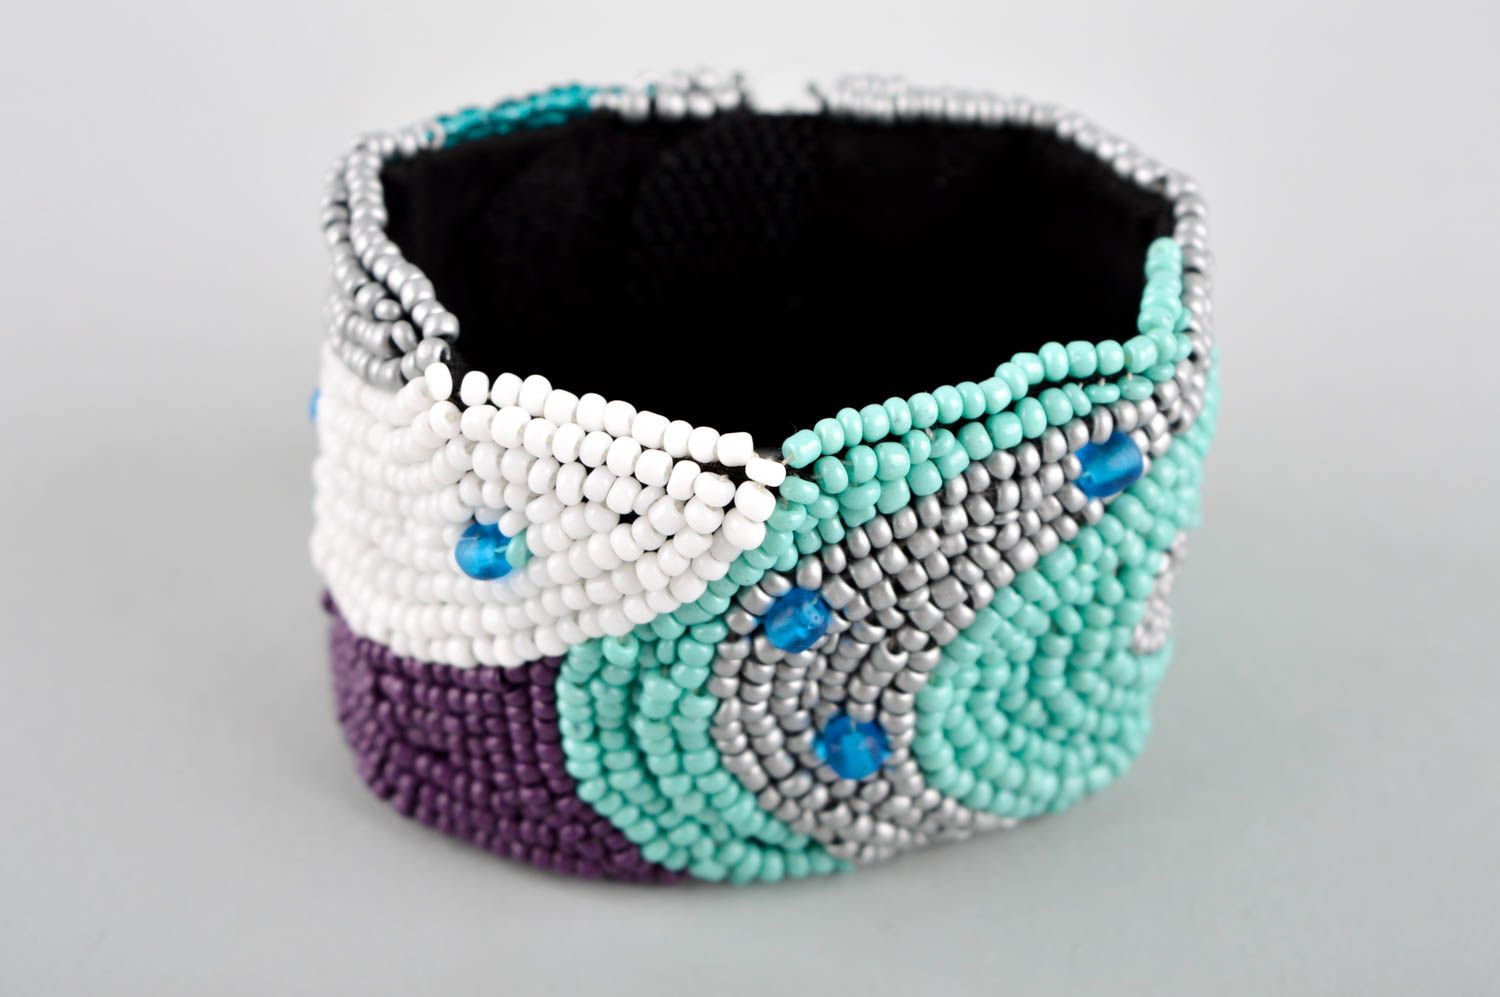 Stylish handmade beaded wide wrist bracelet in turquoise, white and black colors photo 2